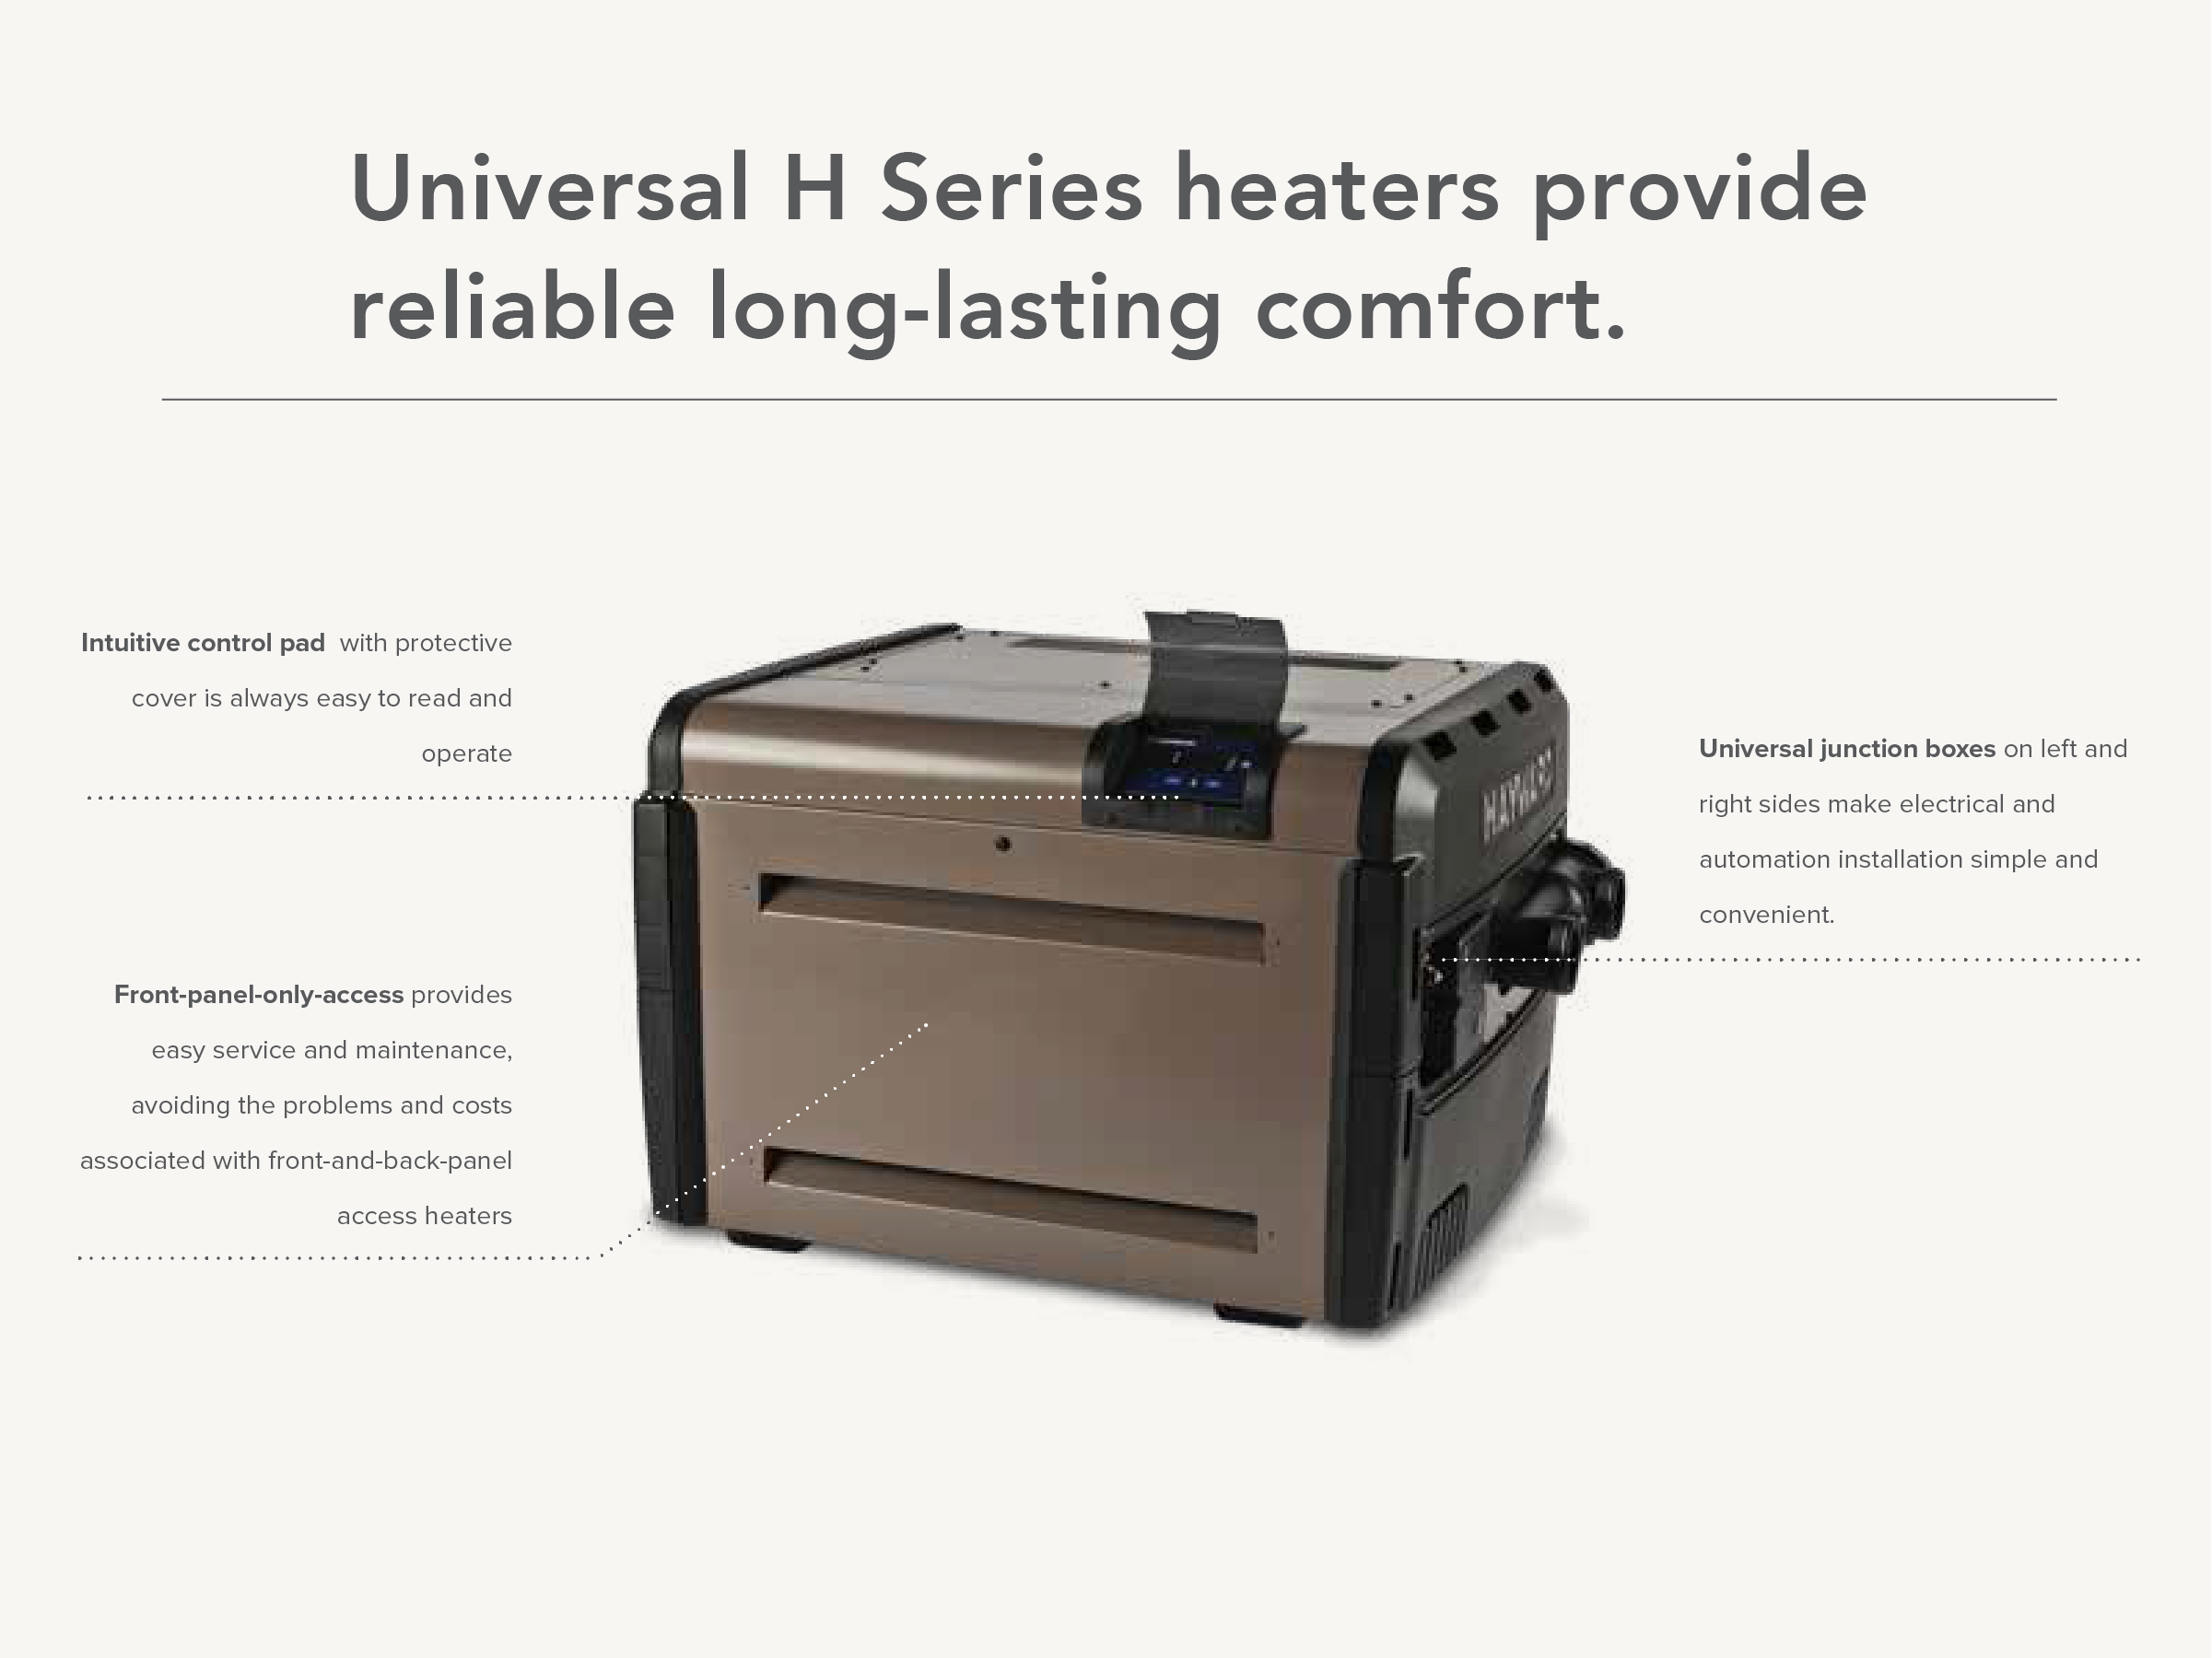 universal-h-series-features-02.png